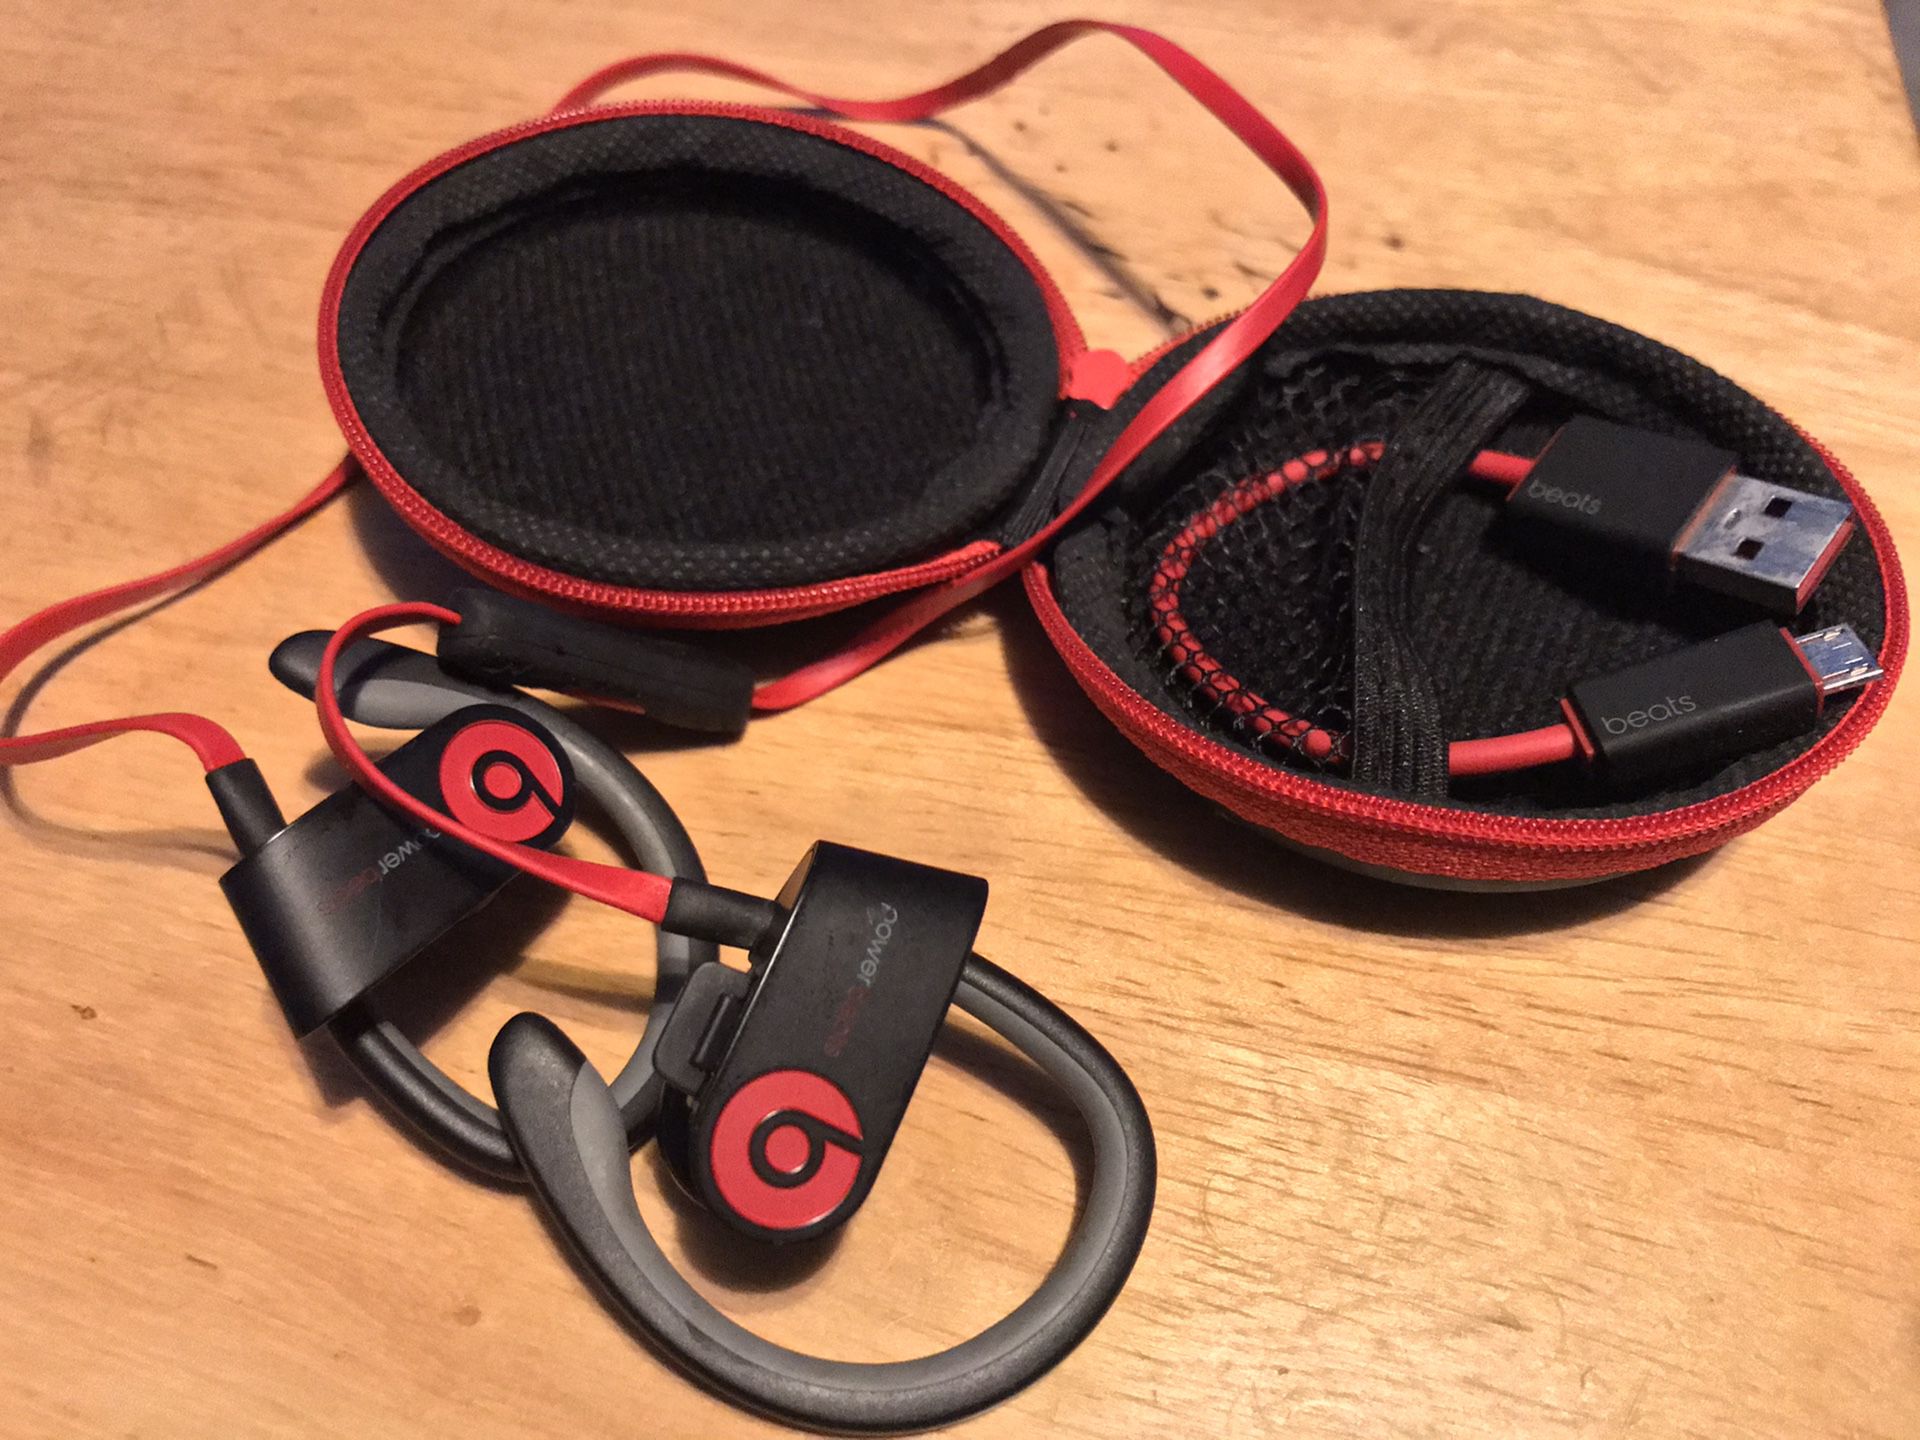 Beats by Dr. Dre Bluetooth Headphones with microphone